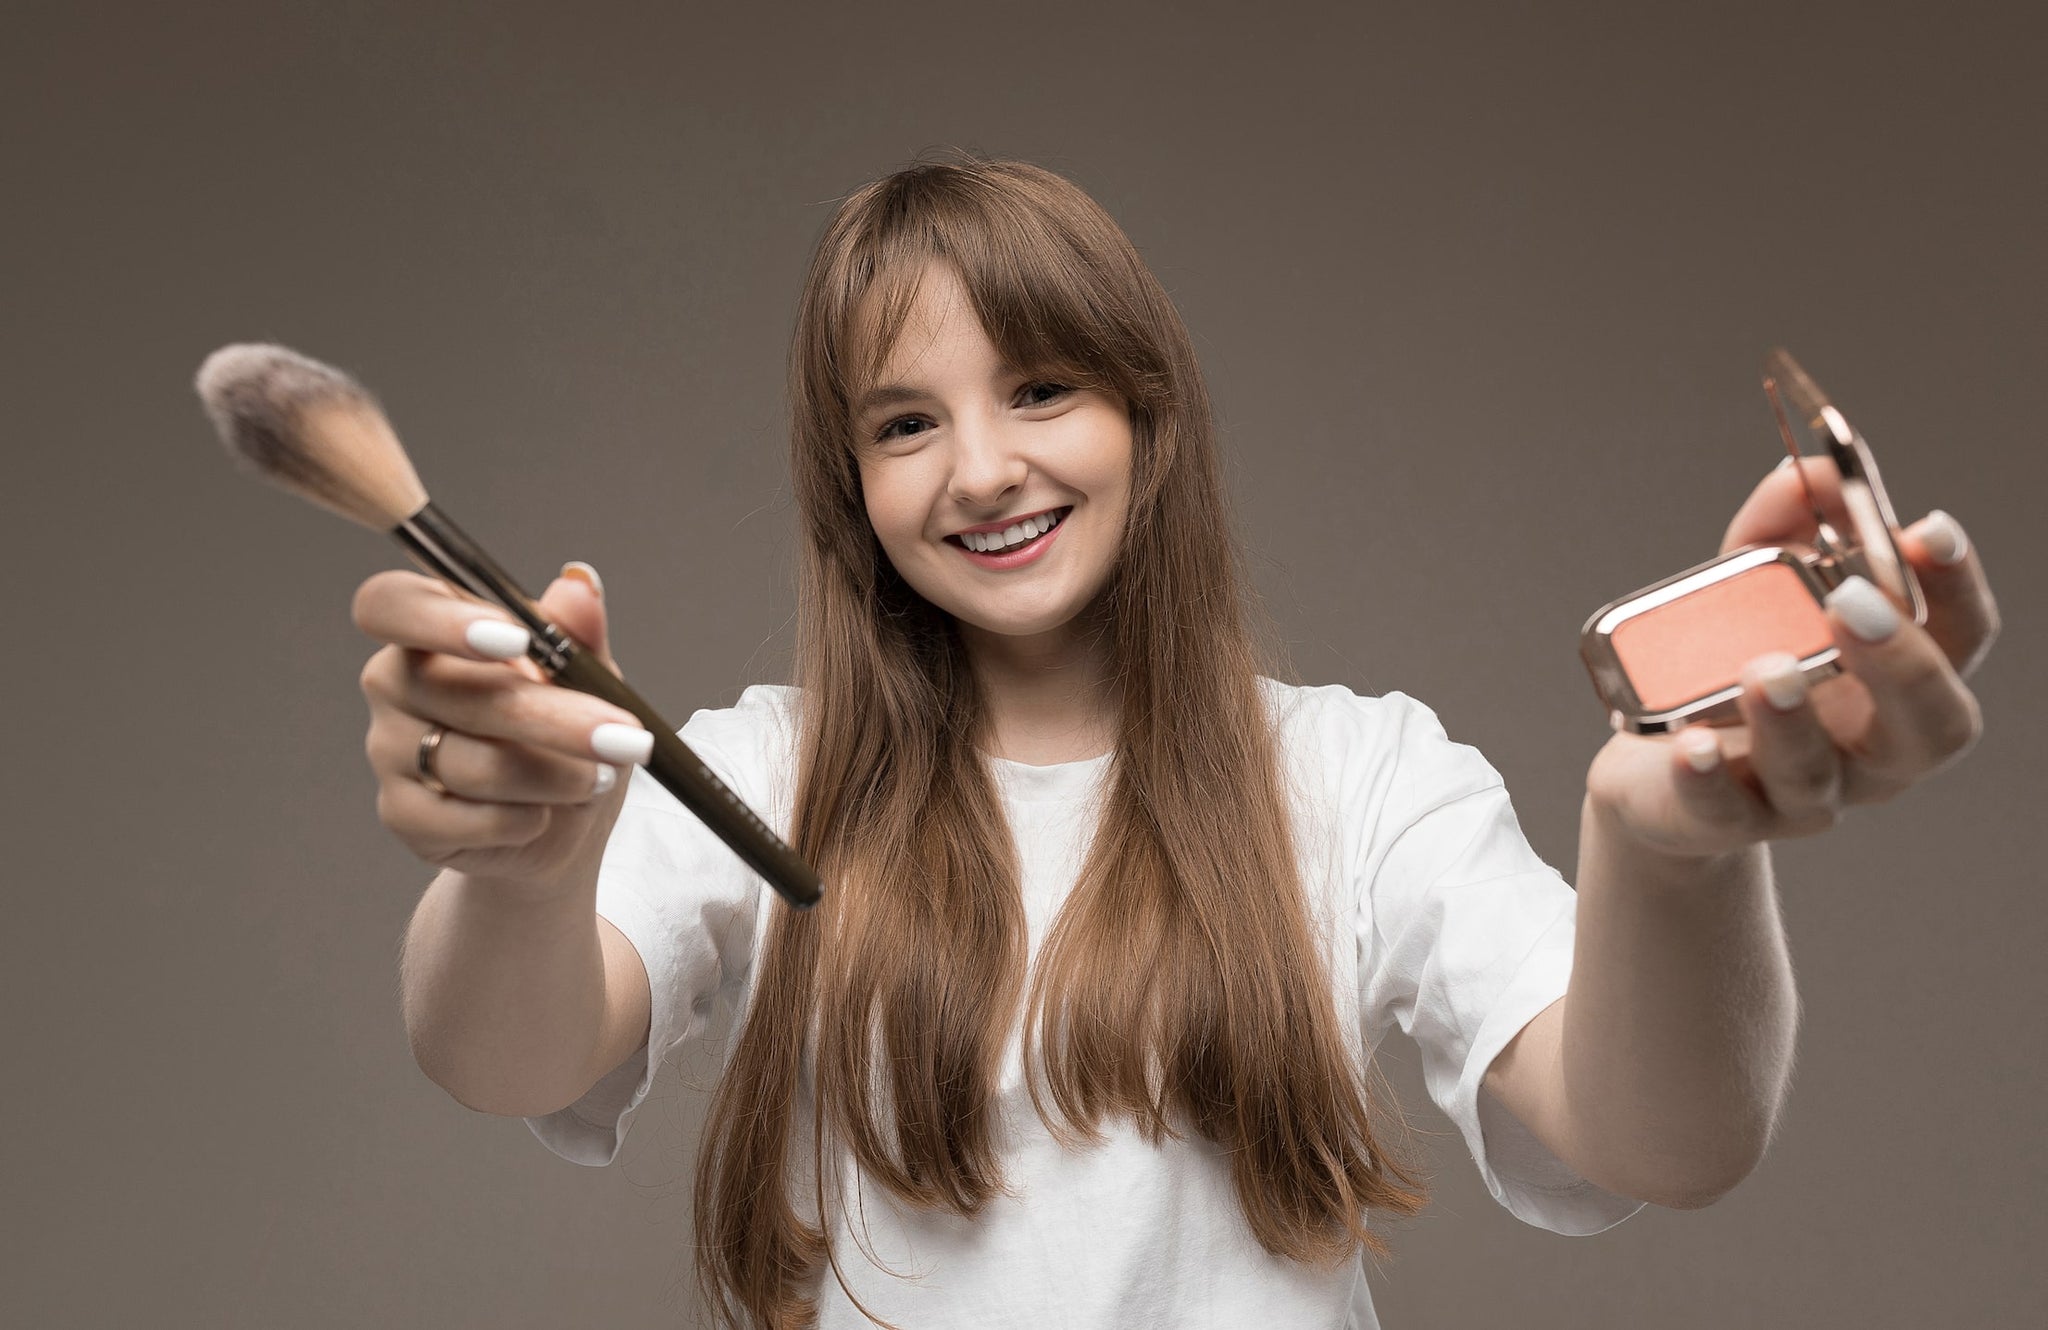 makeup without chemicals safe for young skin